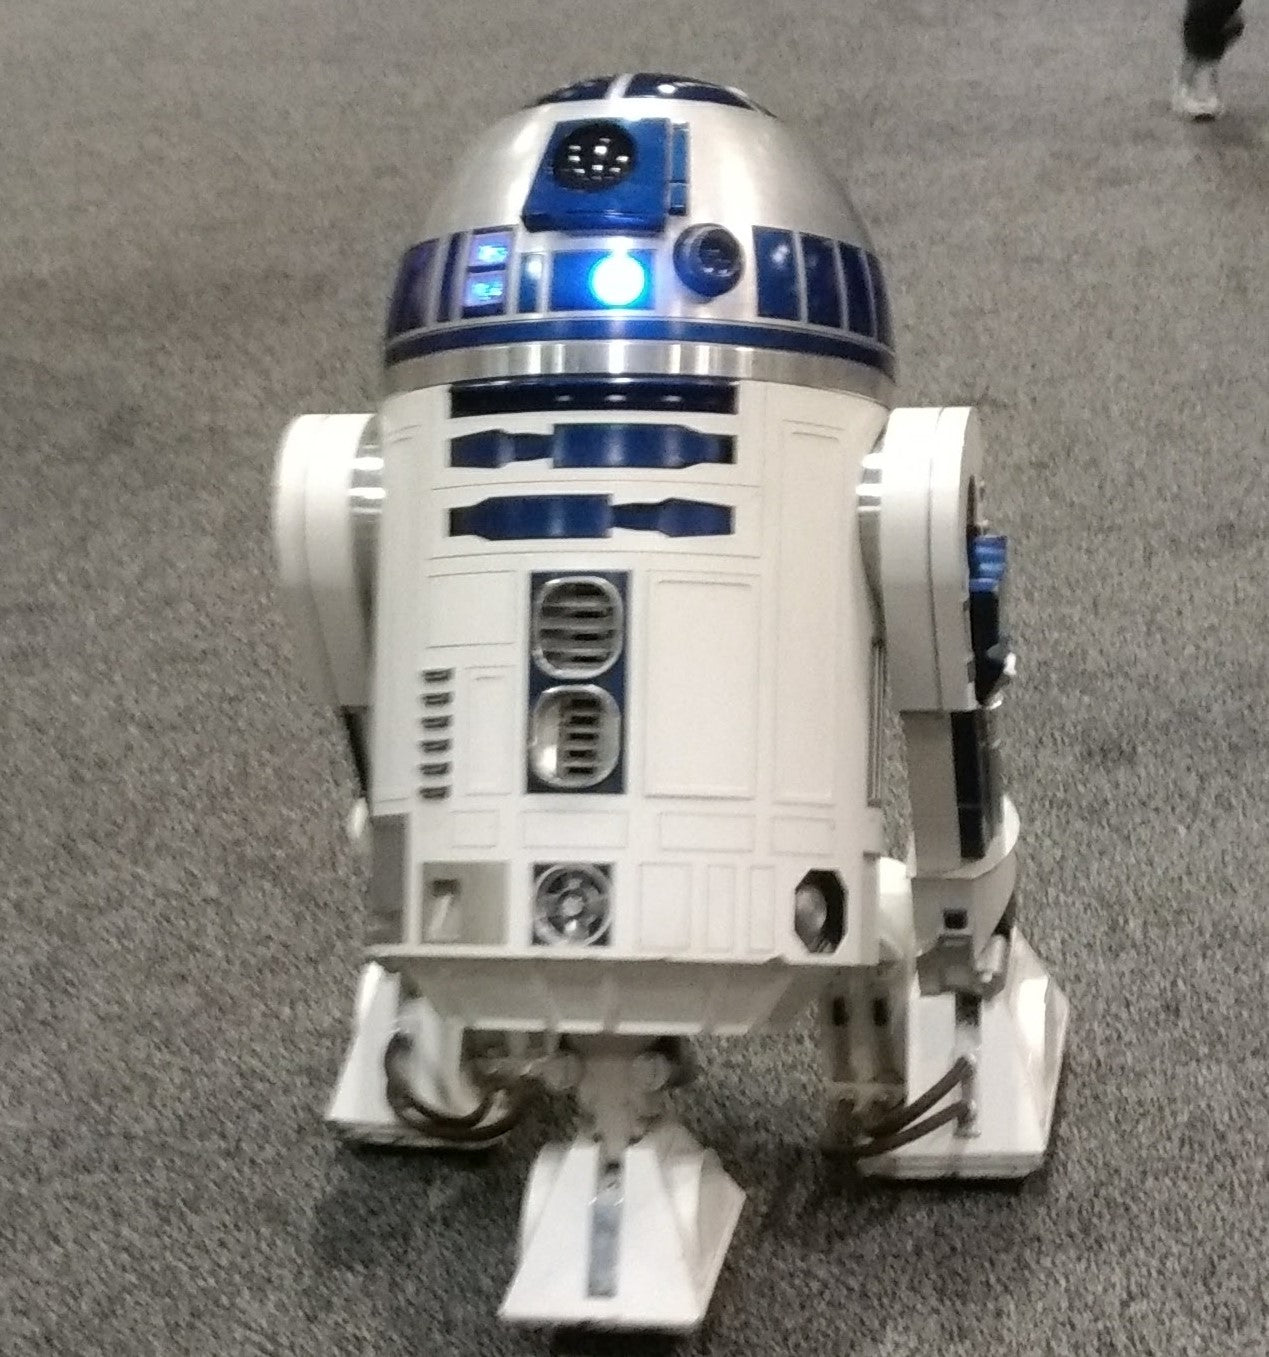 R2-D2 says Beep Beep Boop about Nerd Imports